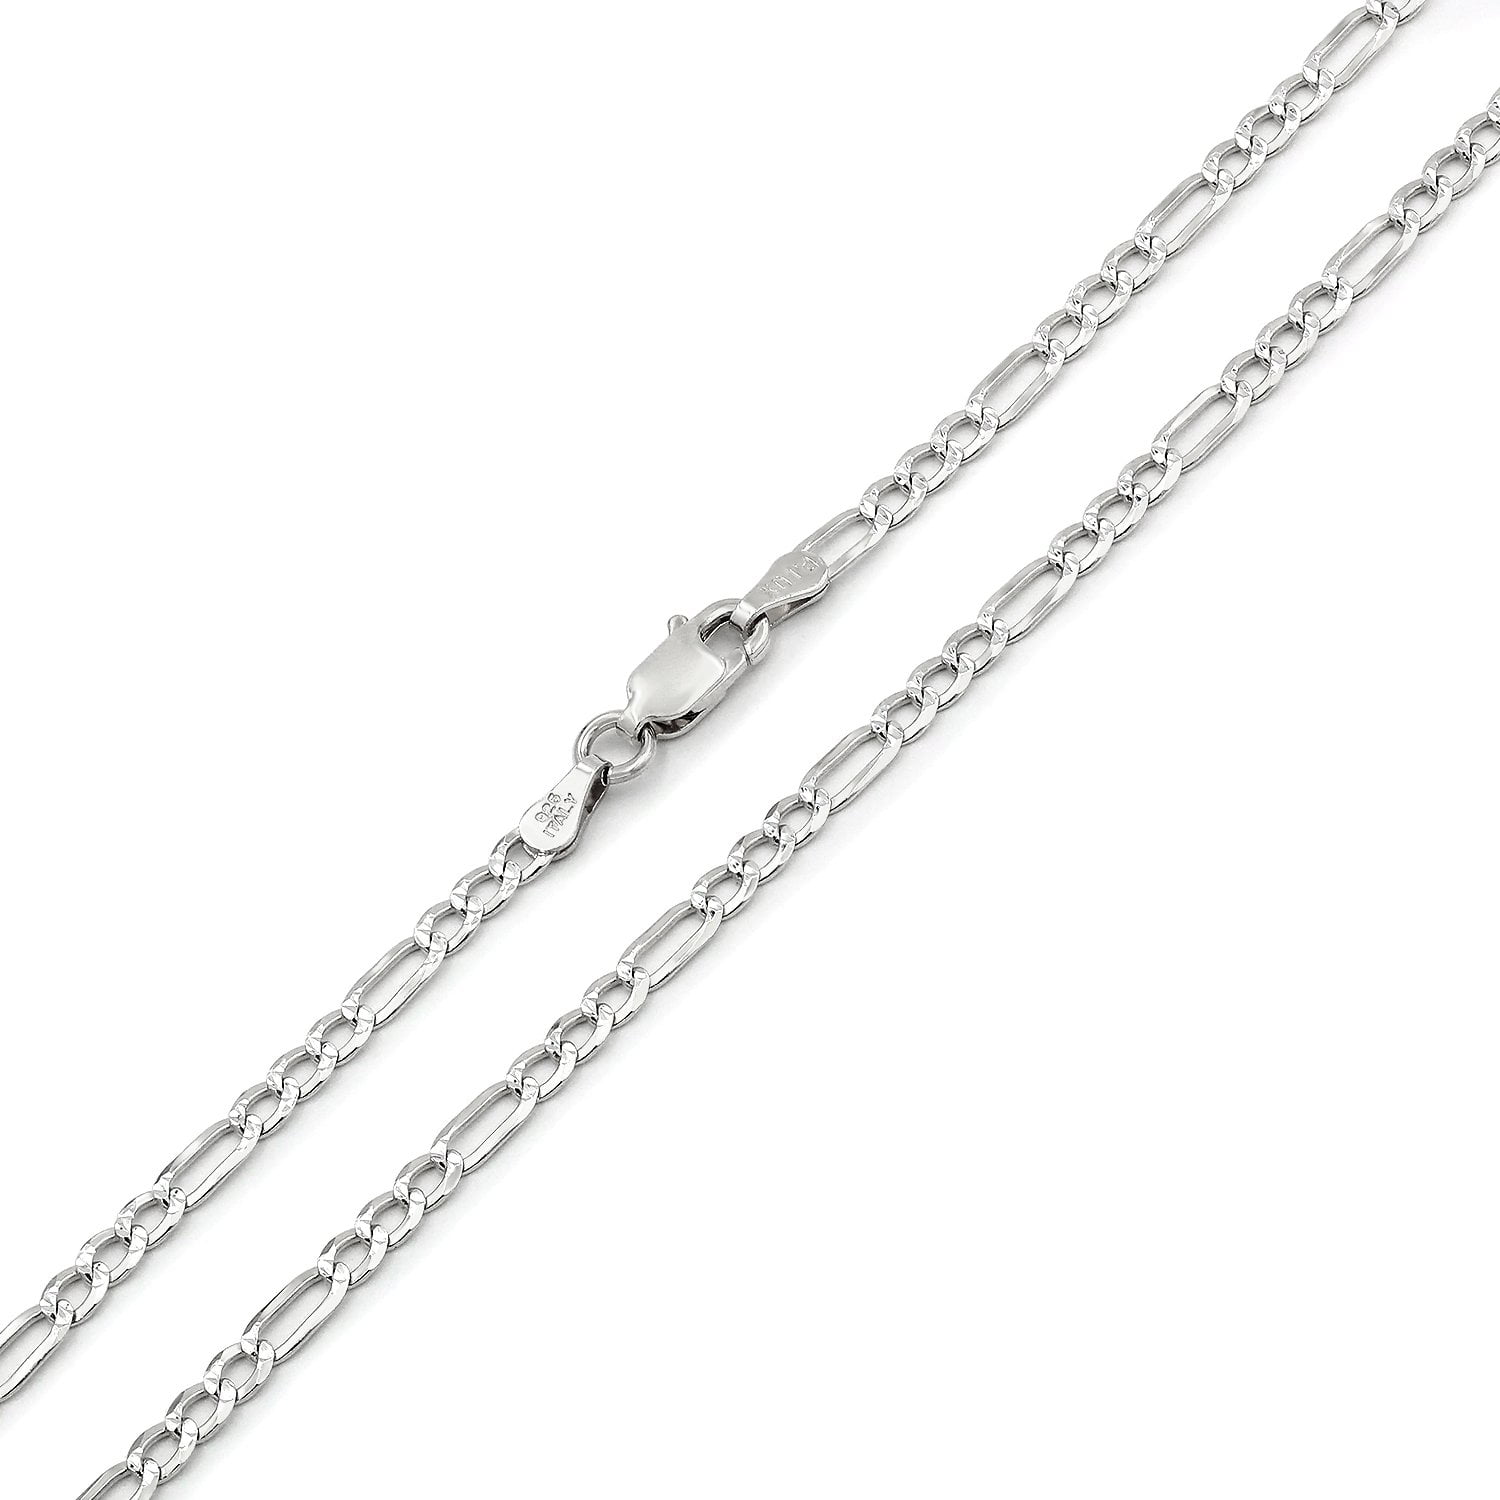 Solid 925 Sterling Silver 2.2mm Italian Figaro Link Chain Necklace 16-30 